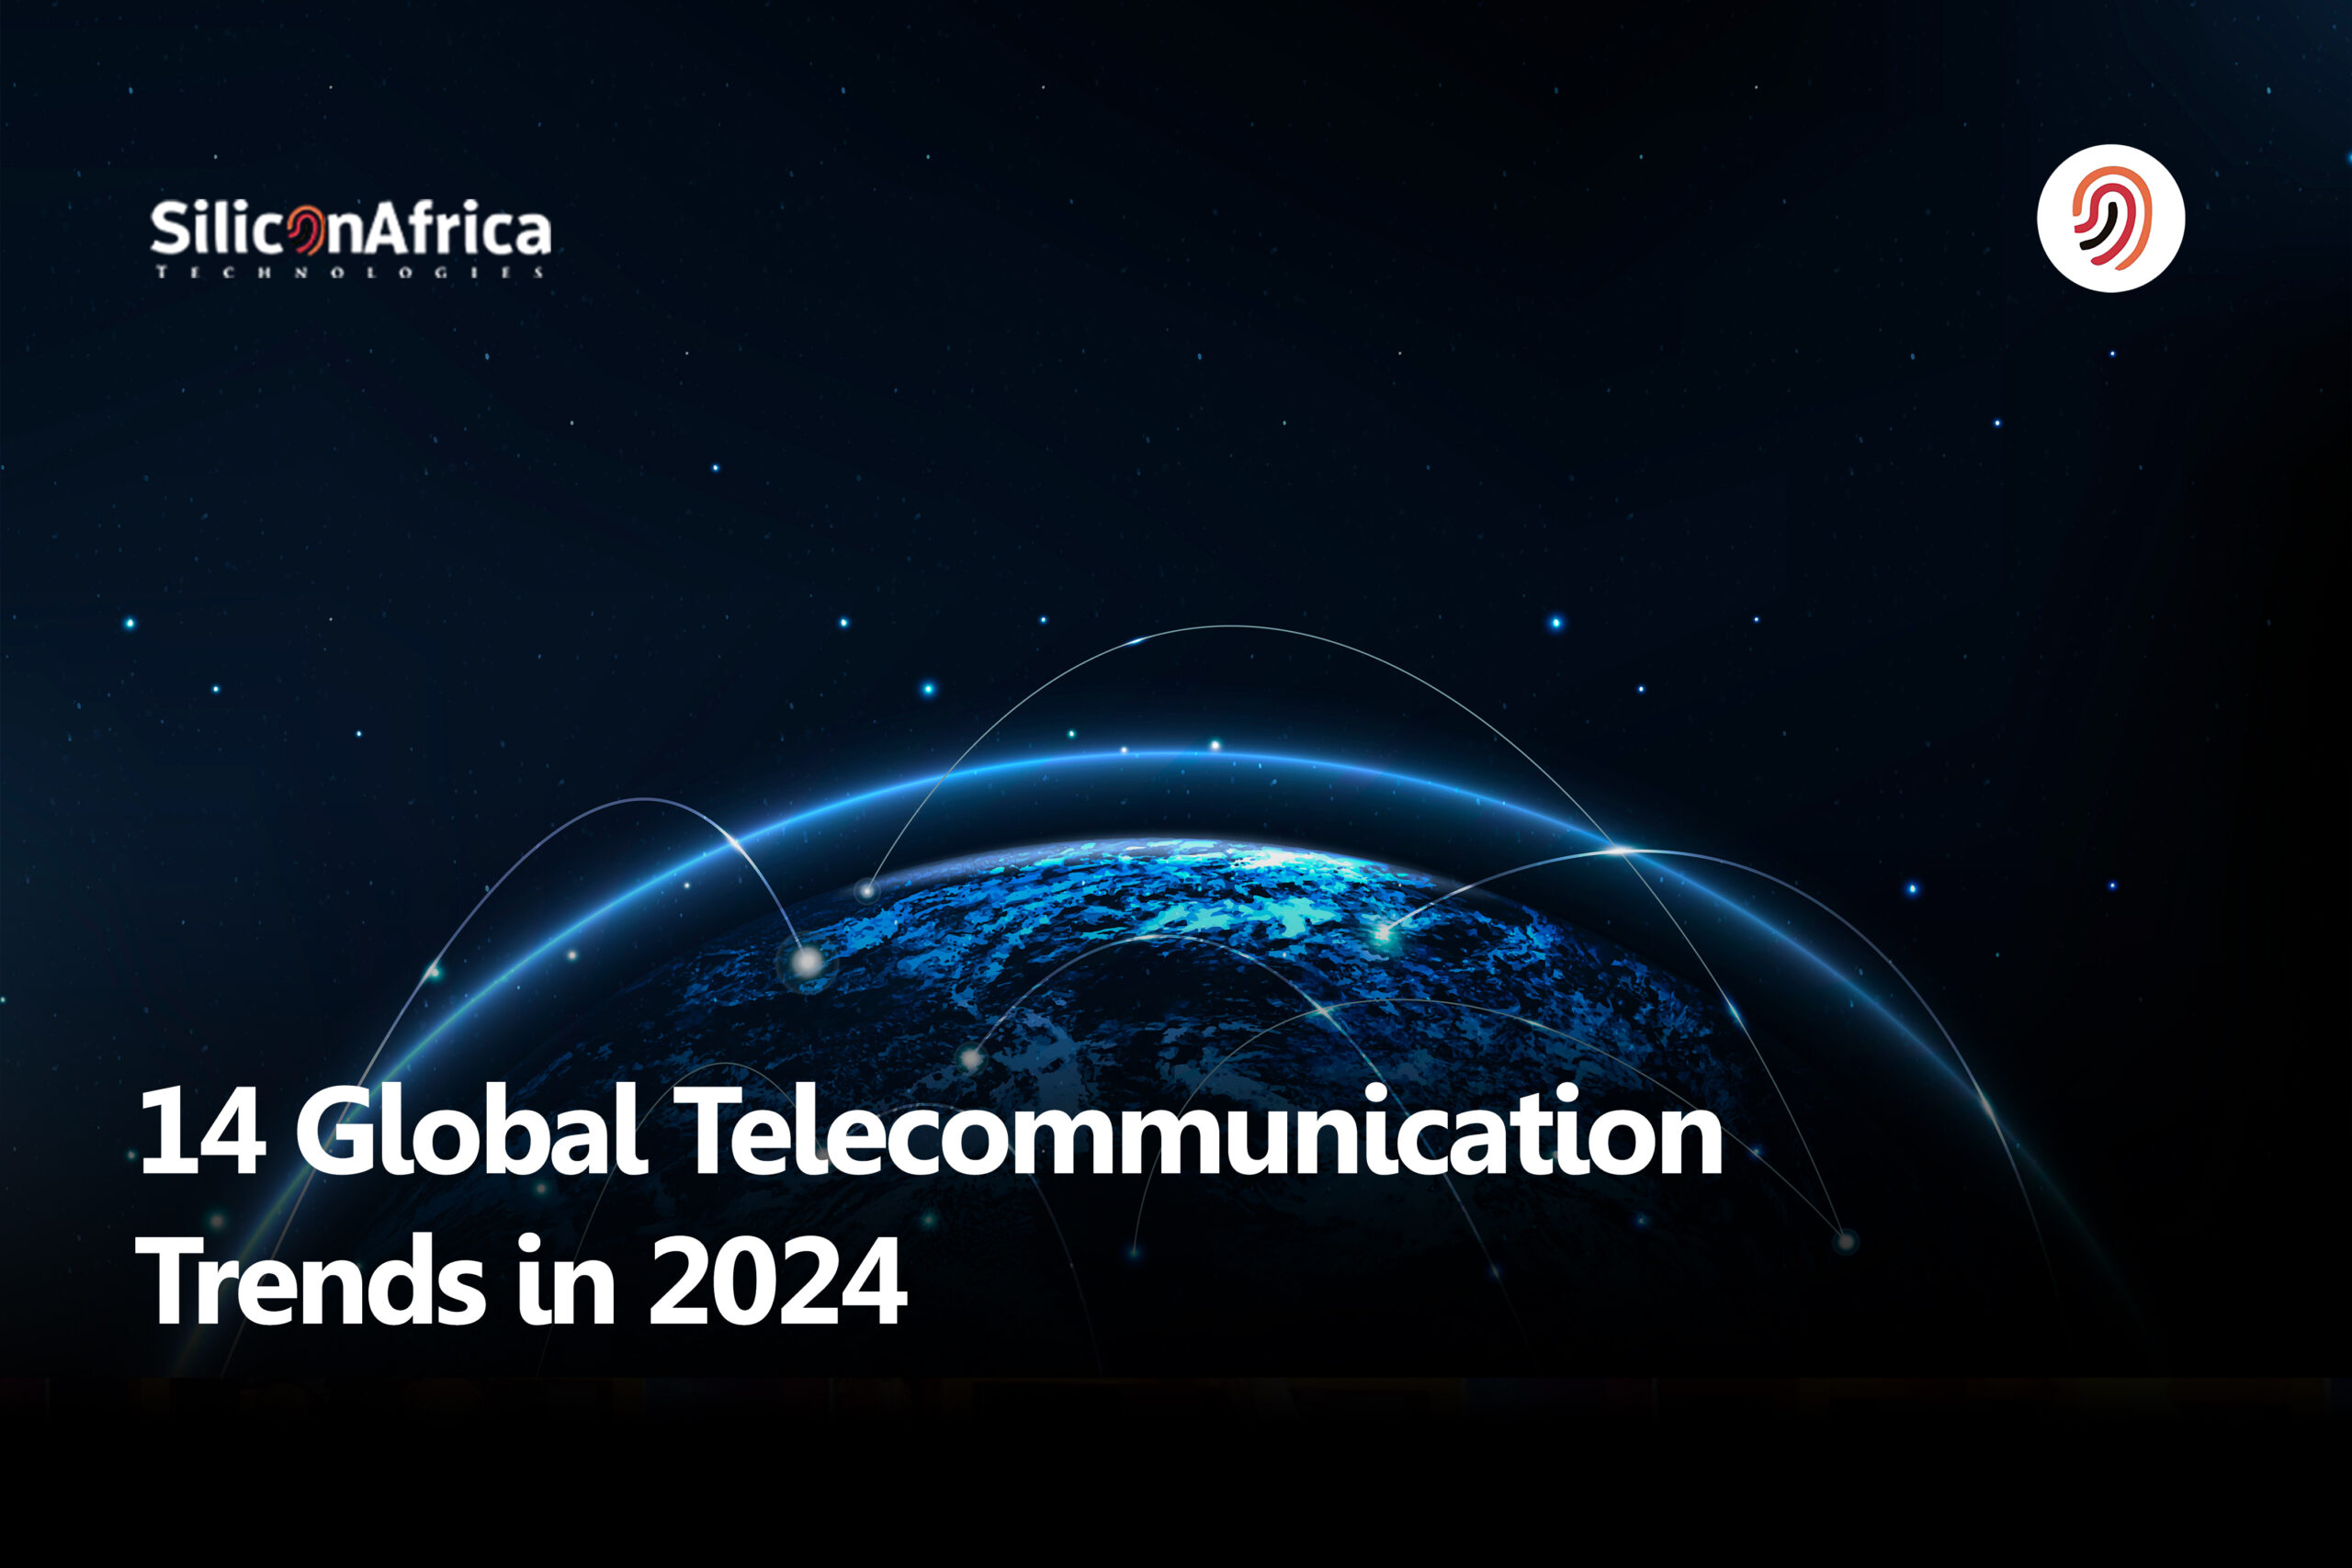 14 Global Telecommunication Trends in 2024